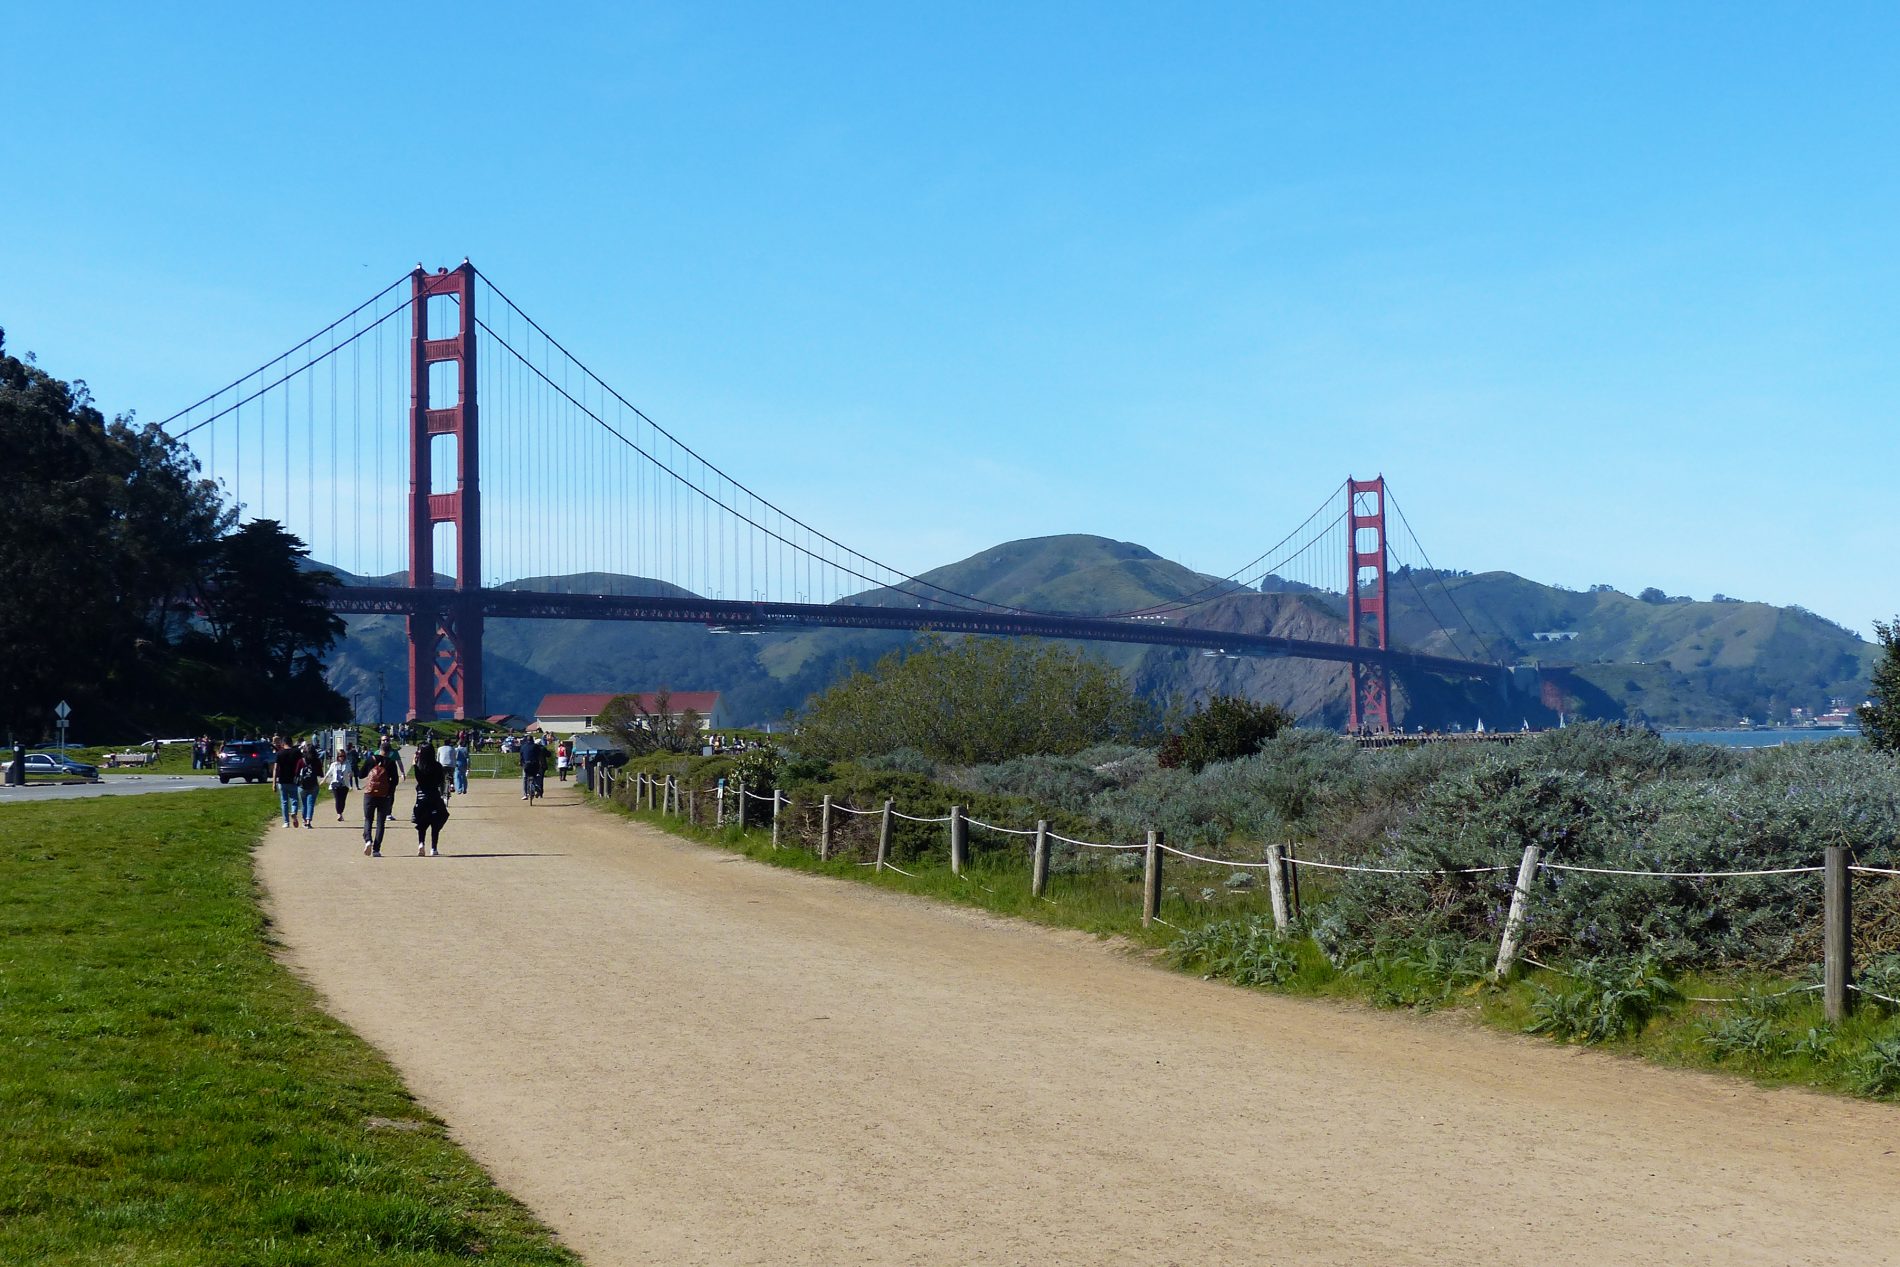 People walking along the Golden Gate Promenade through Crissy Field with the Golden Gate Bridge in the background.